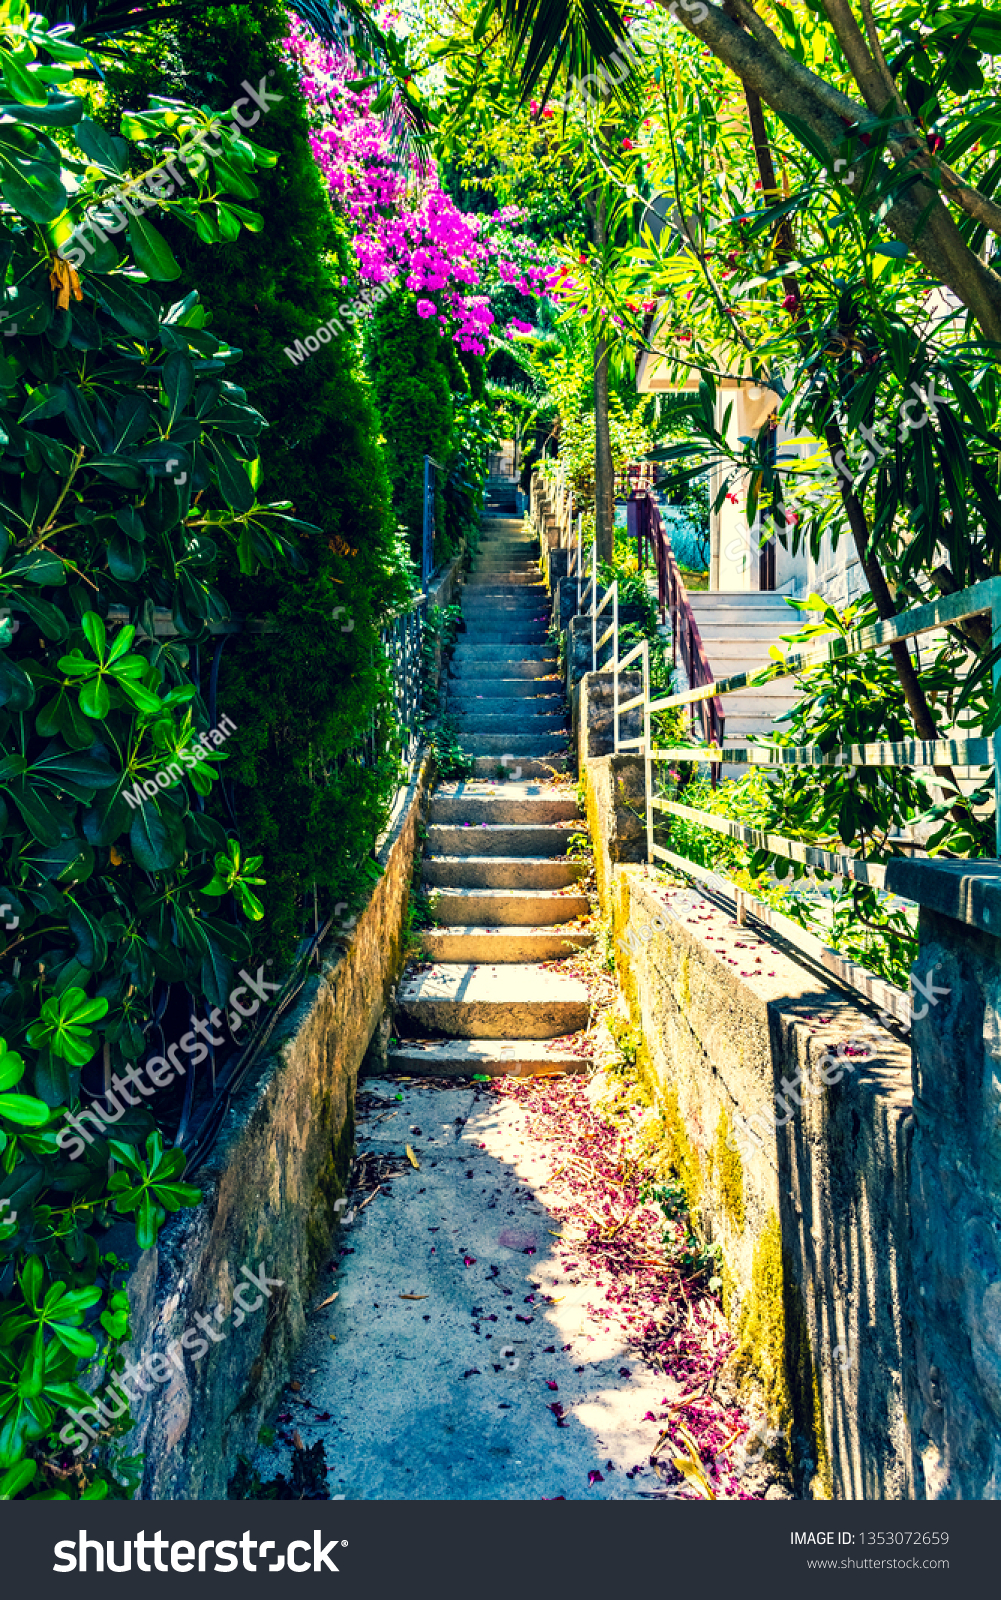 Stairway surrounded with trees greenery bushes and foliage - Summer scene of intimate stairways #1353072659